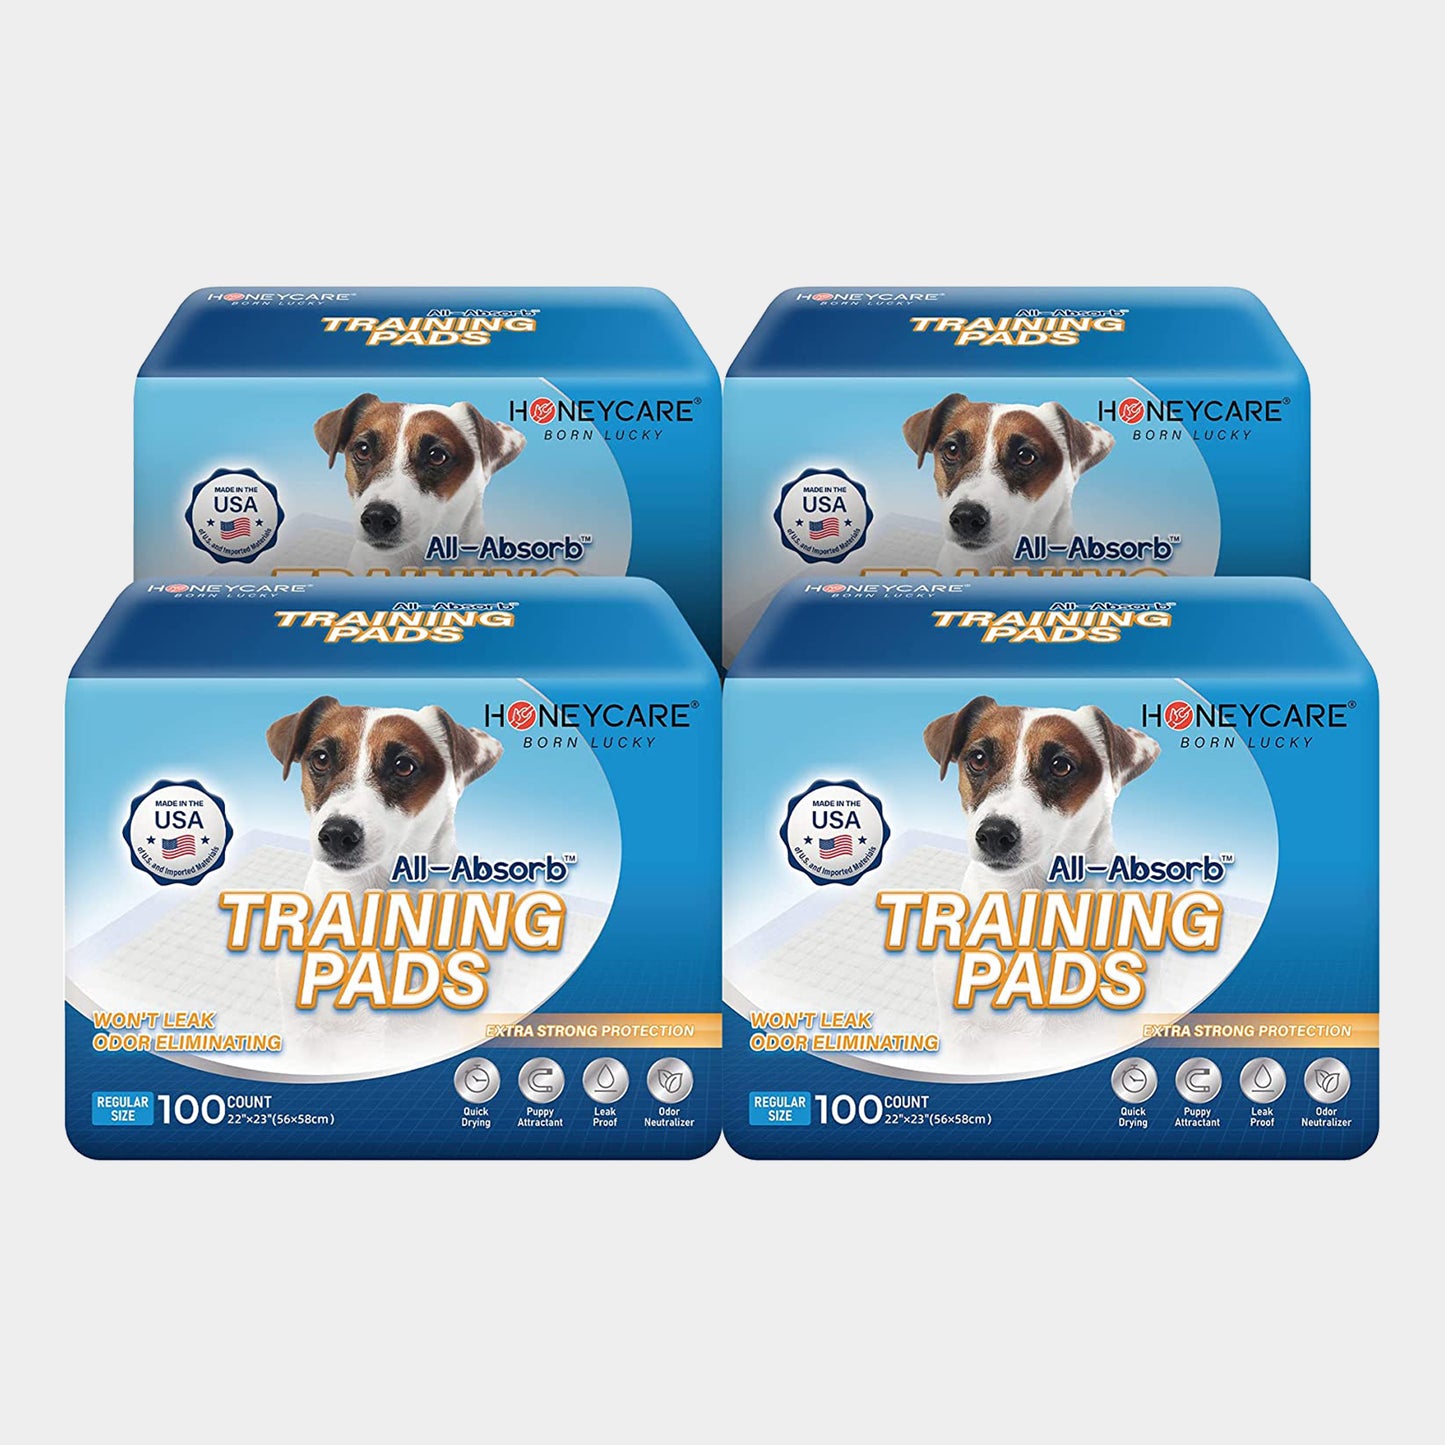 22" x 23" Dog Training Pads, 4 Packs, 400 Count